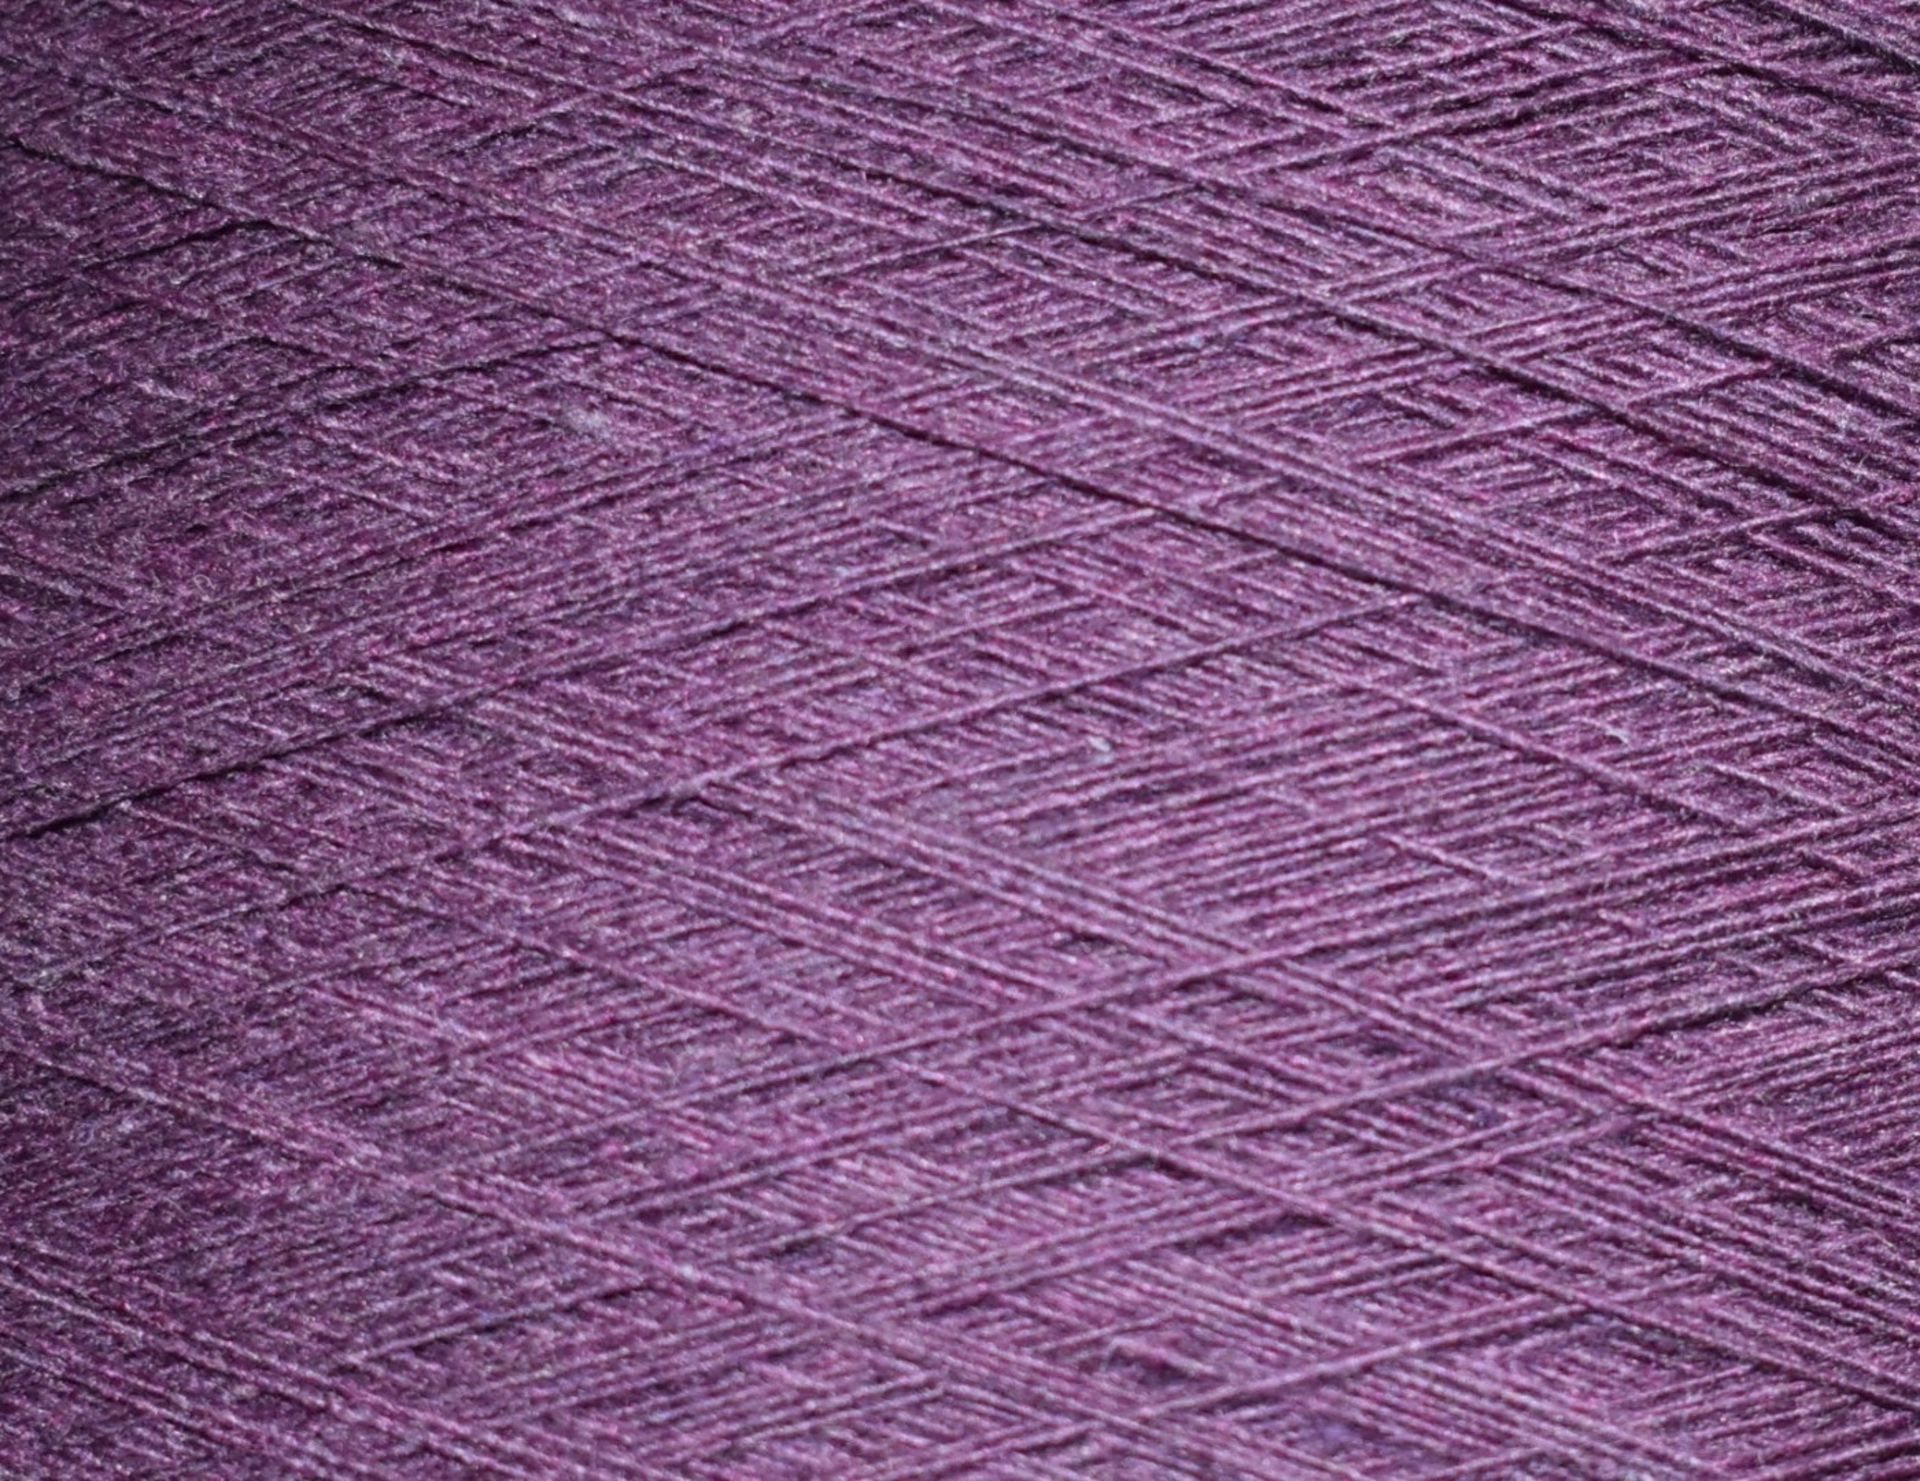 1 x Cone of 1/13 MicroCotton Knitting Yarn - Purple - Approx Weight: 2,300g - New Stock ABL Yarn - Image 6 of 9